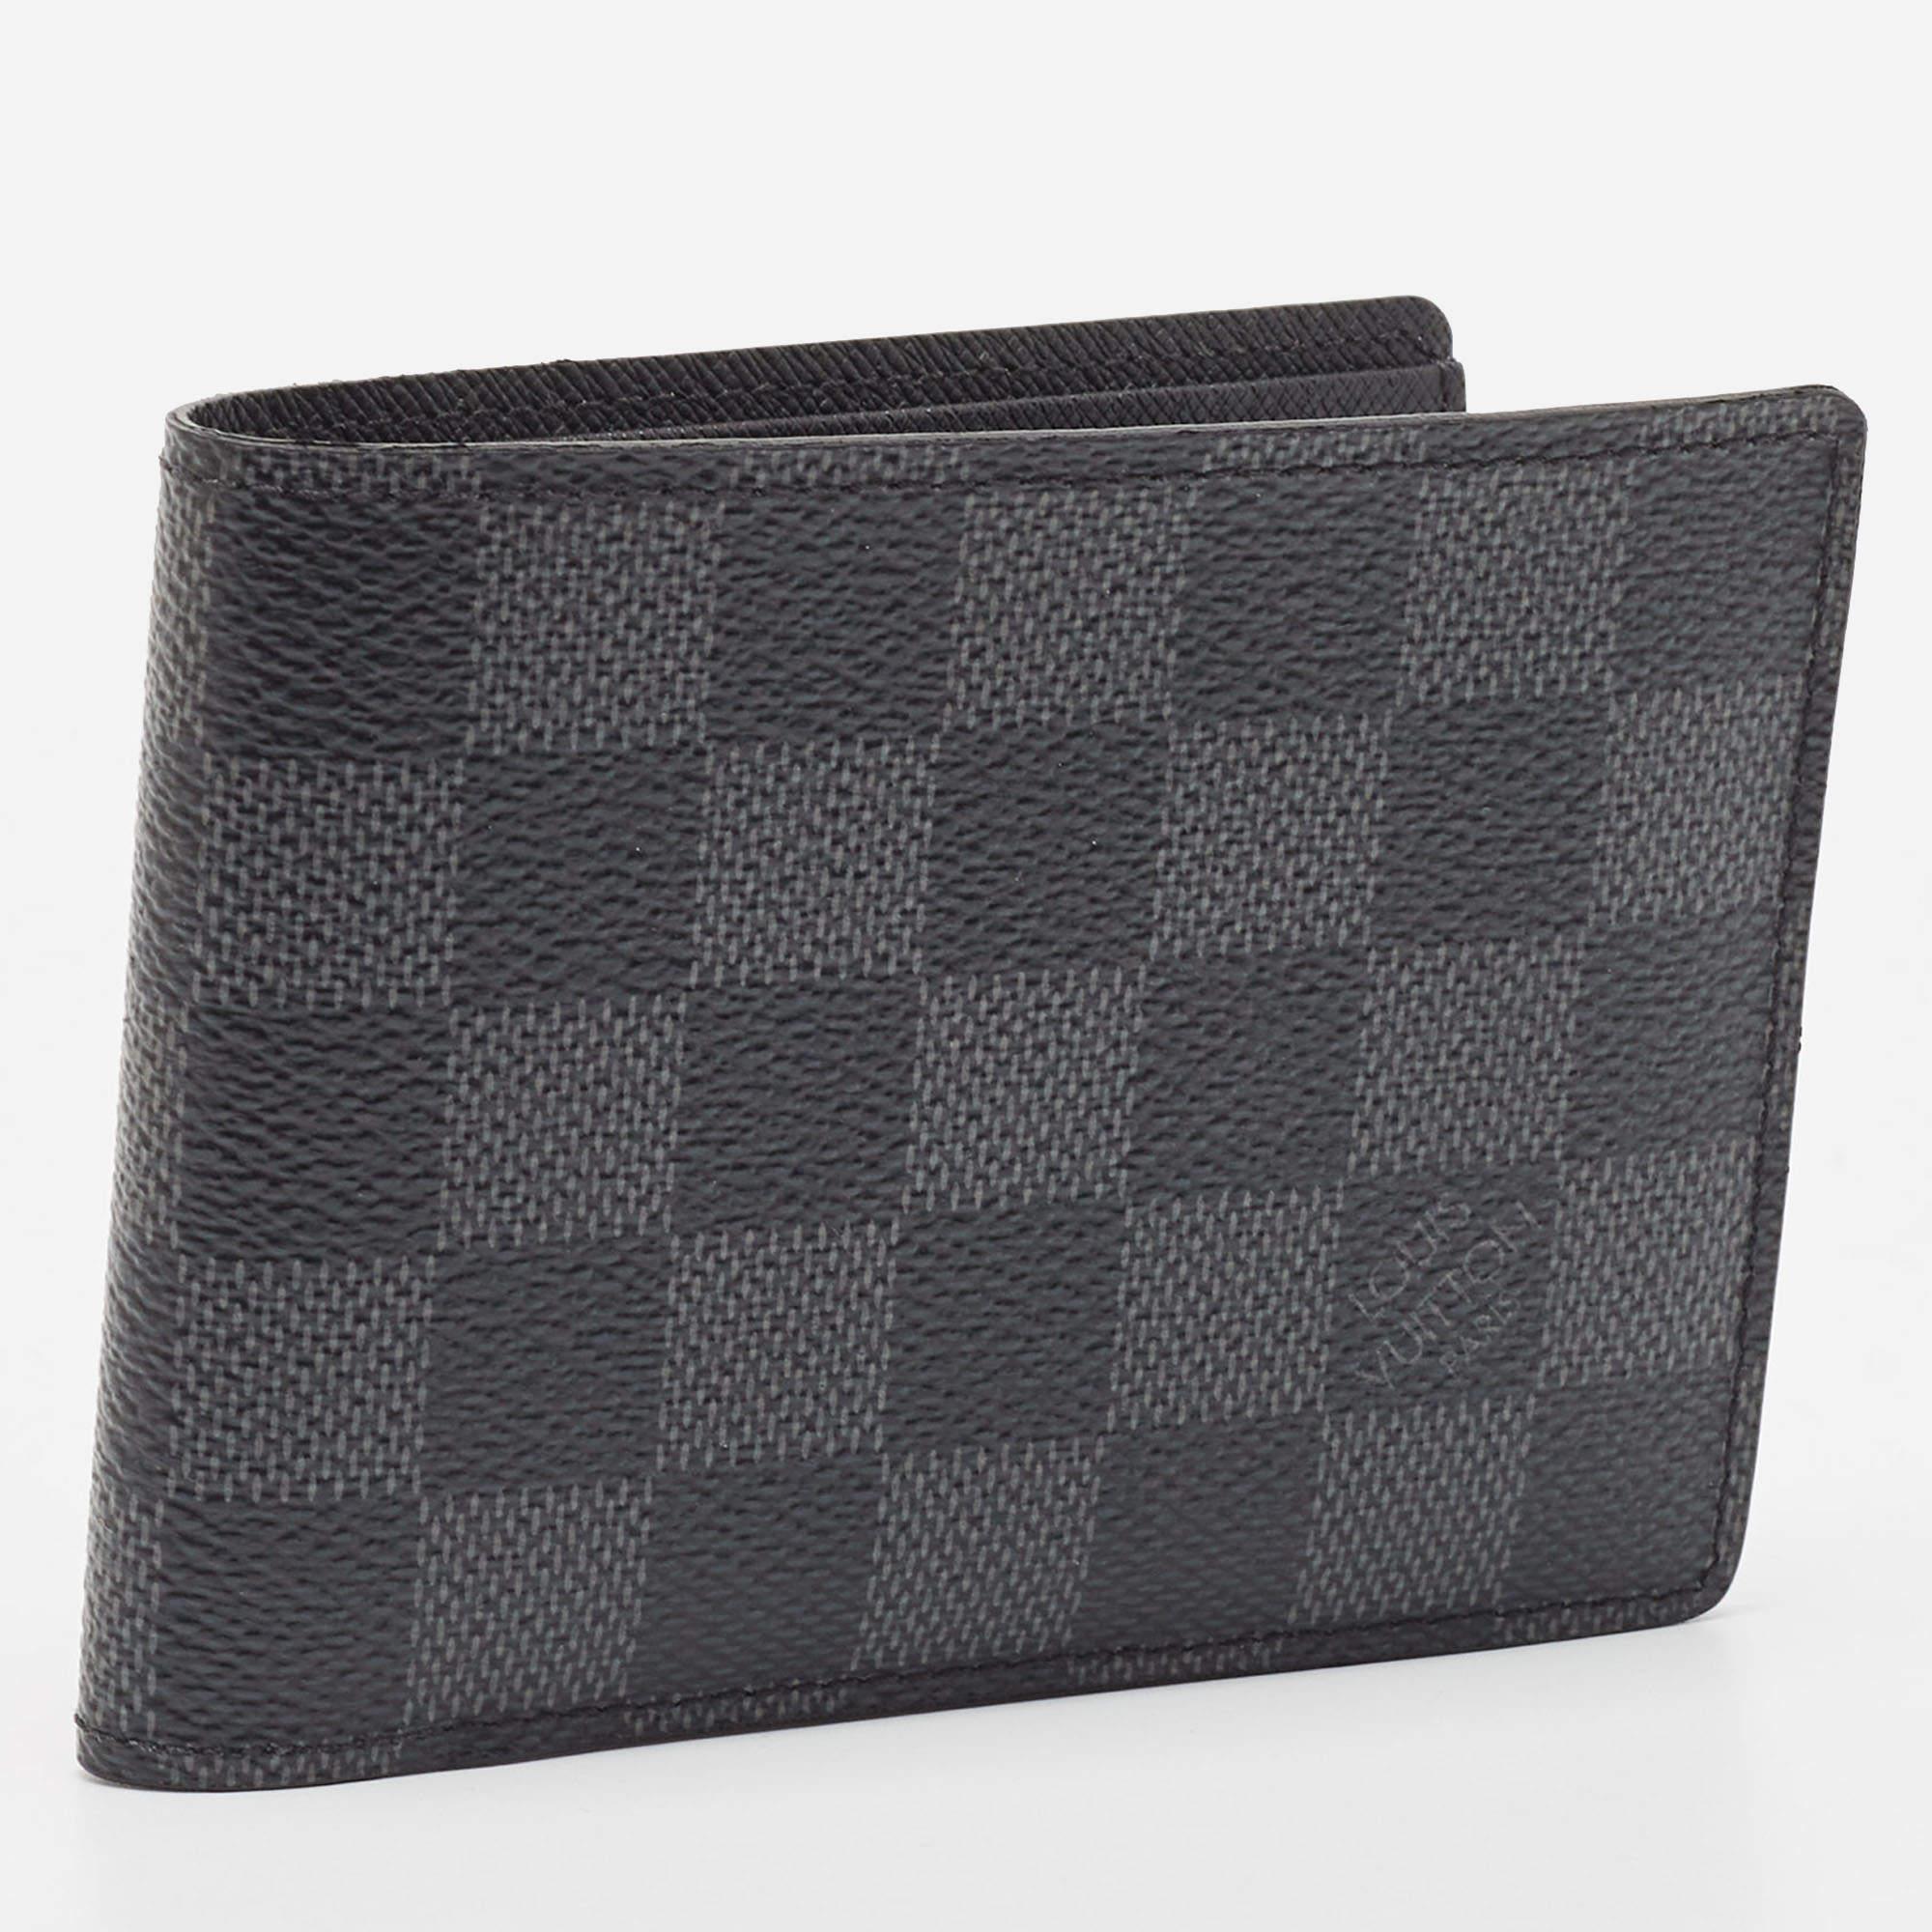 Designed in a slender silhouette that makes it fit in most pockets, this Louis Vuitton bifold wallet is crafted with signature Damier Graphite canvas. It is equipped with multiple card slots and compartments for your cards, receipts and currency.

